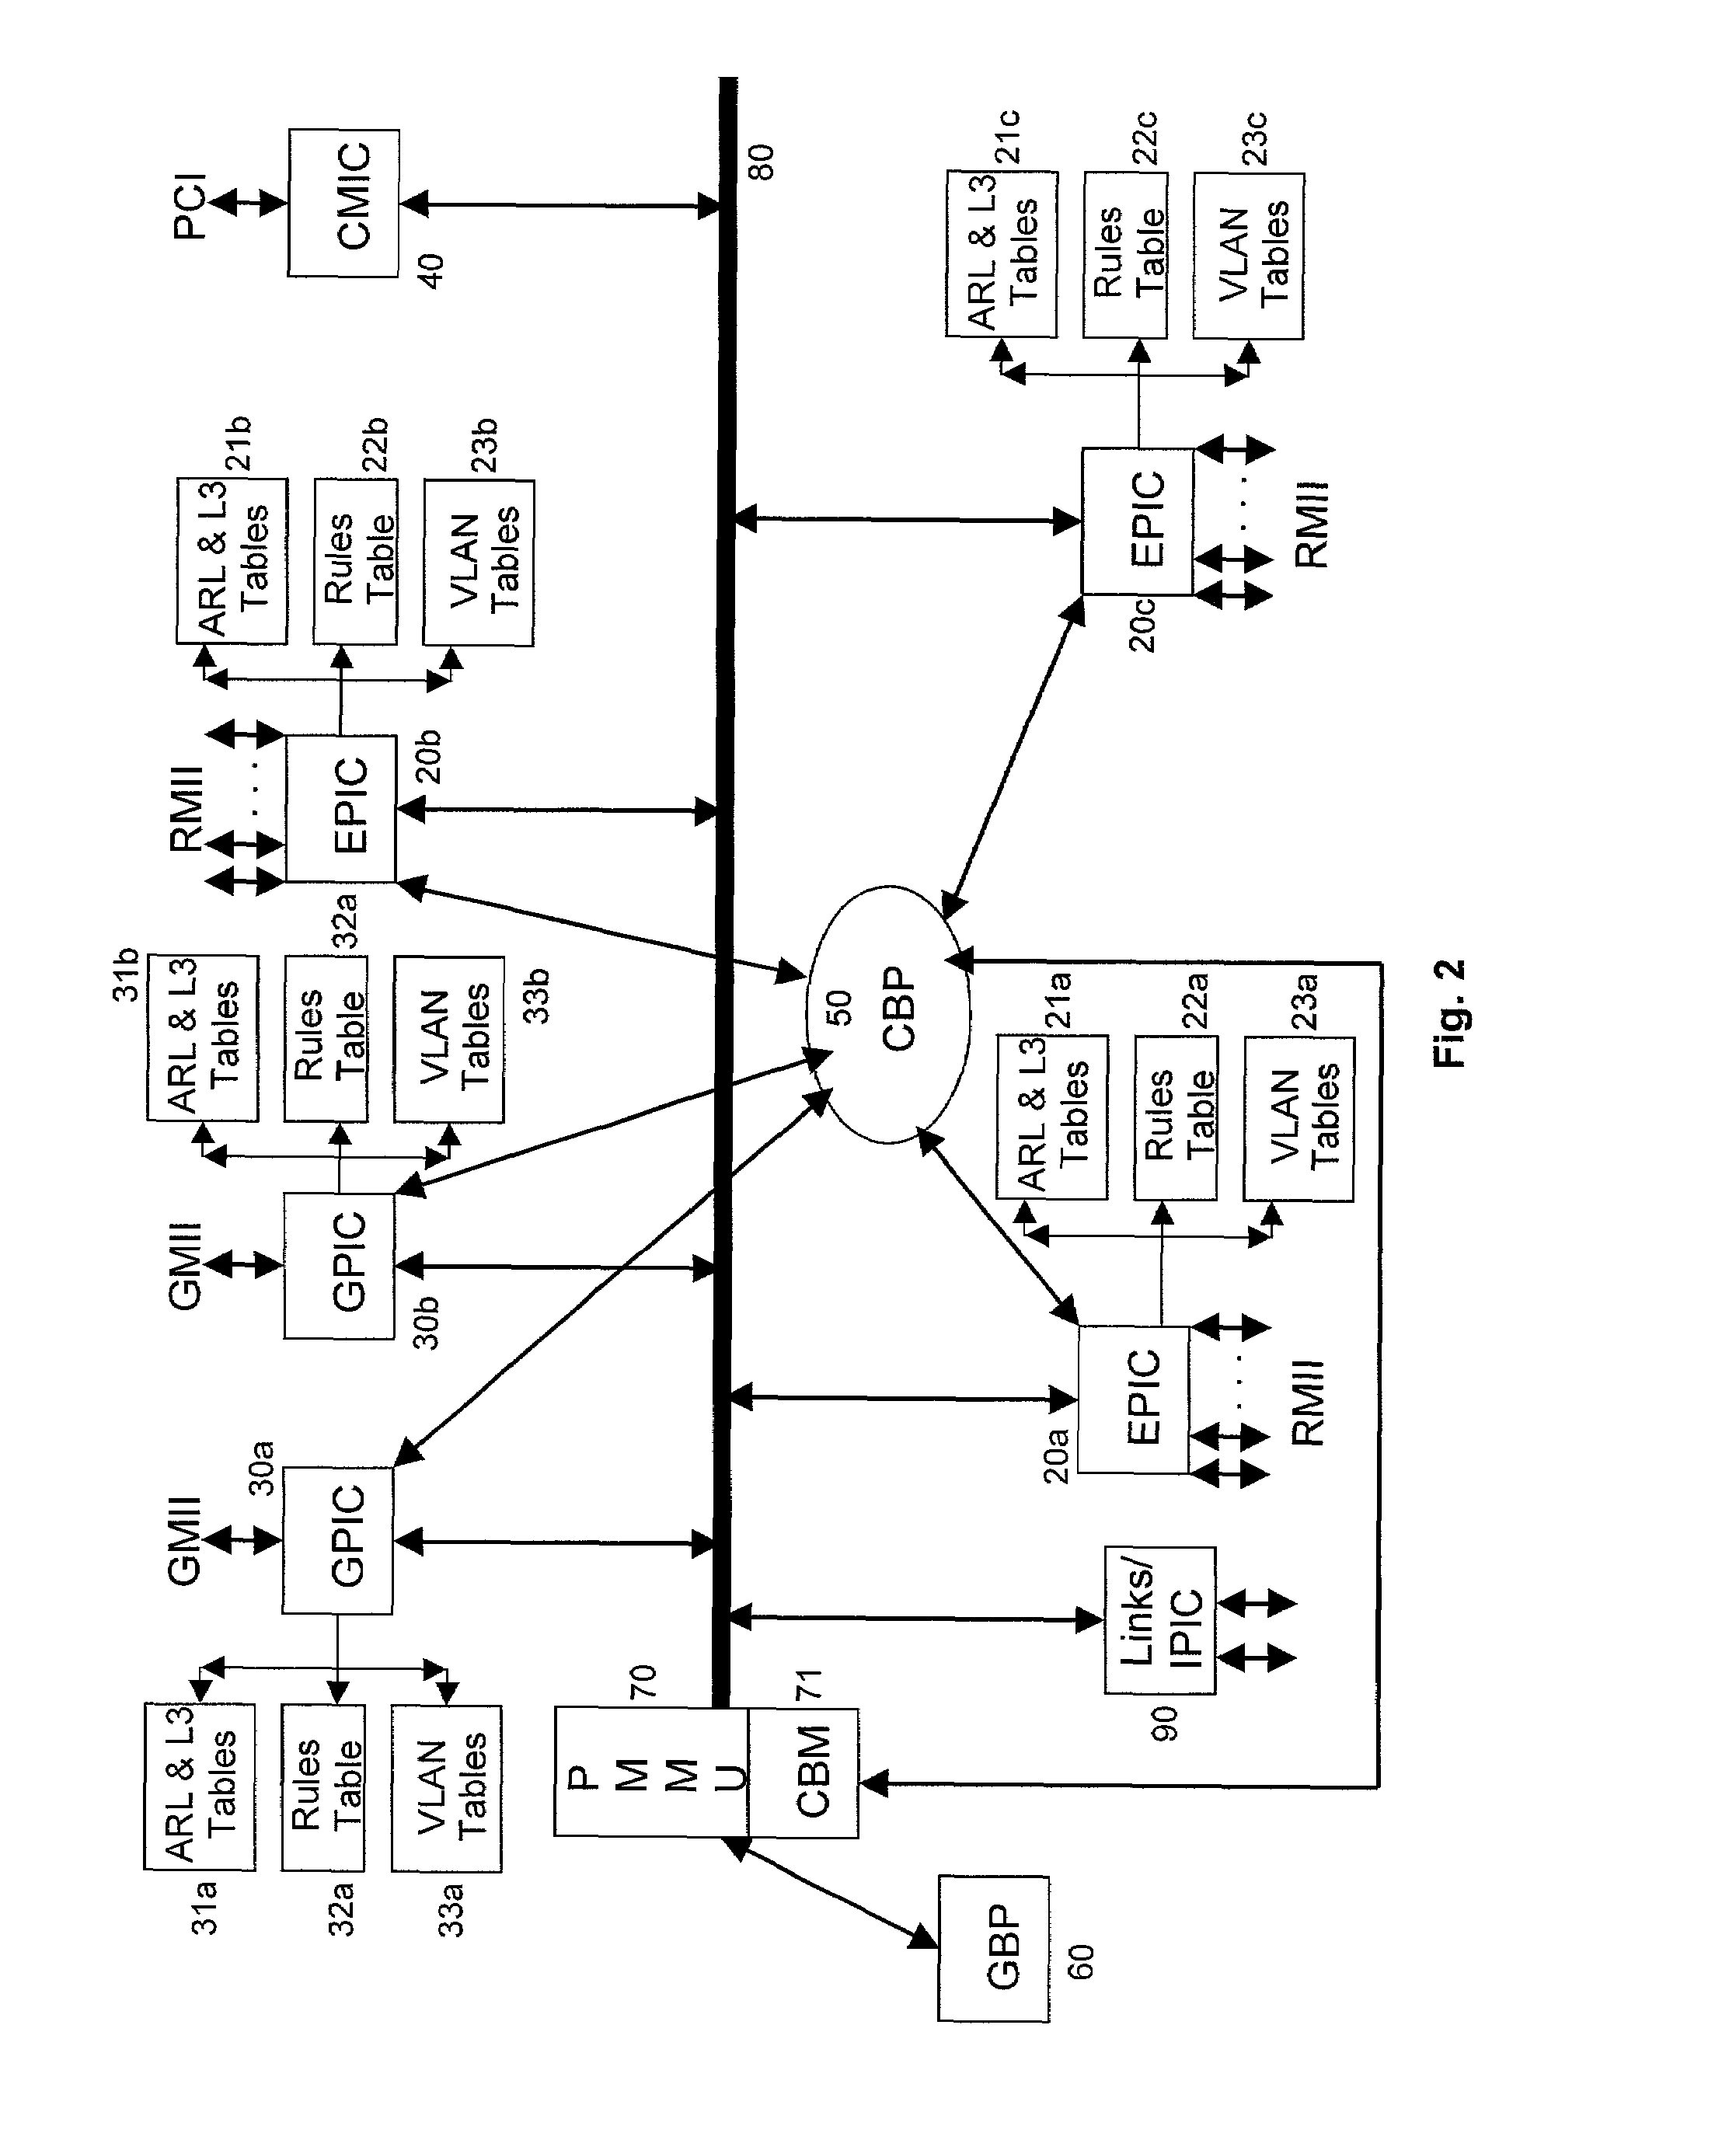 Method and apparatus for enabling access on a network switch